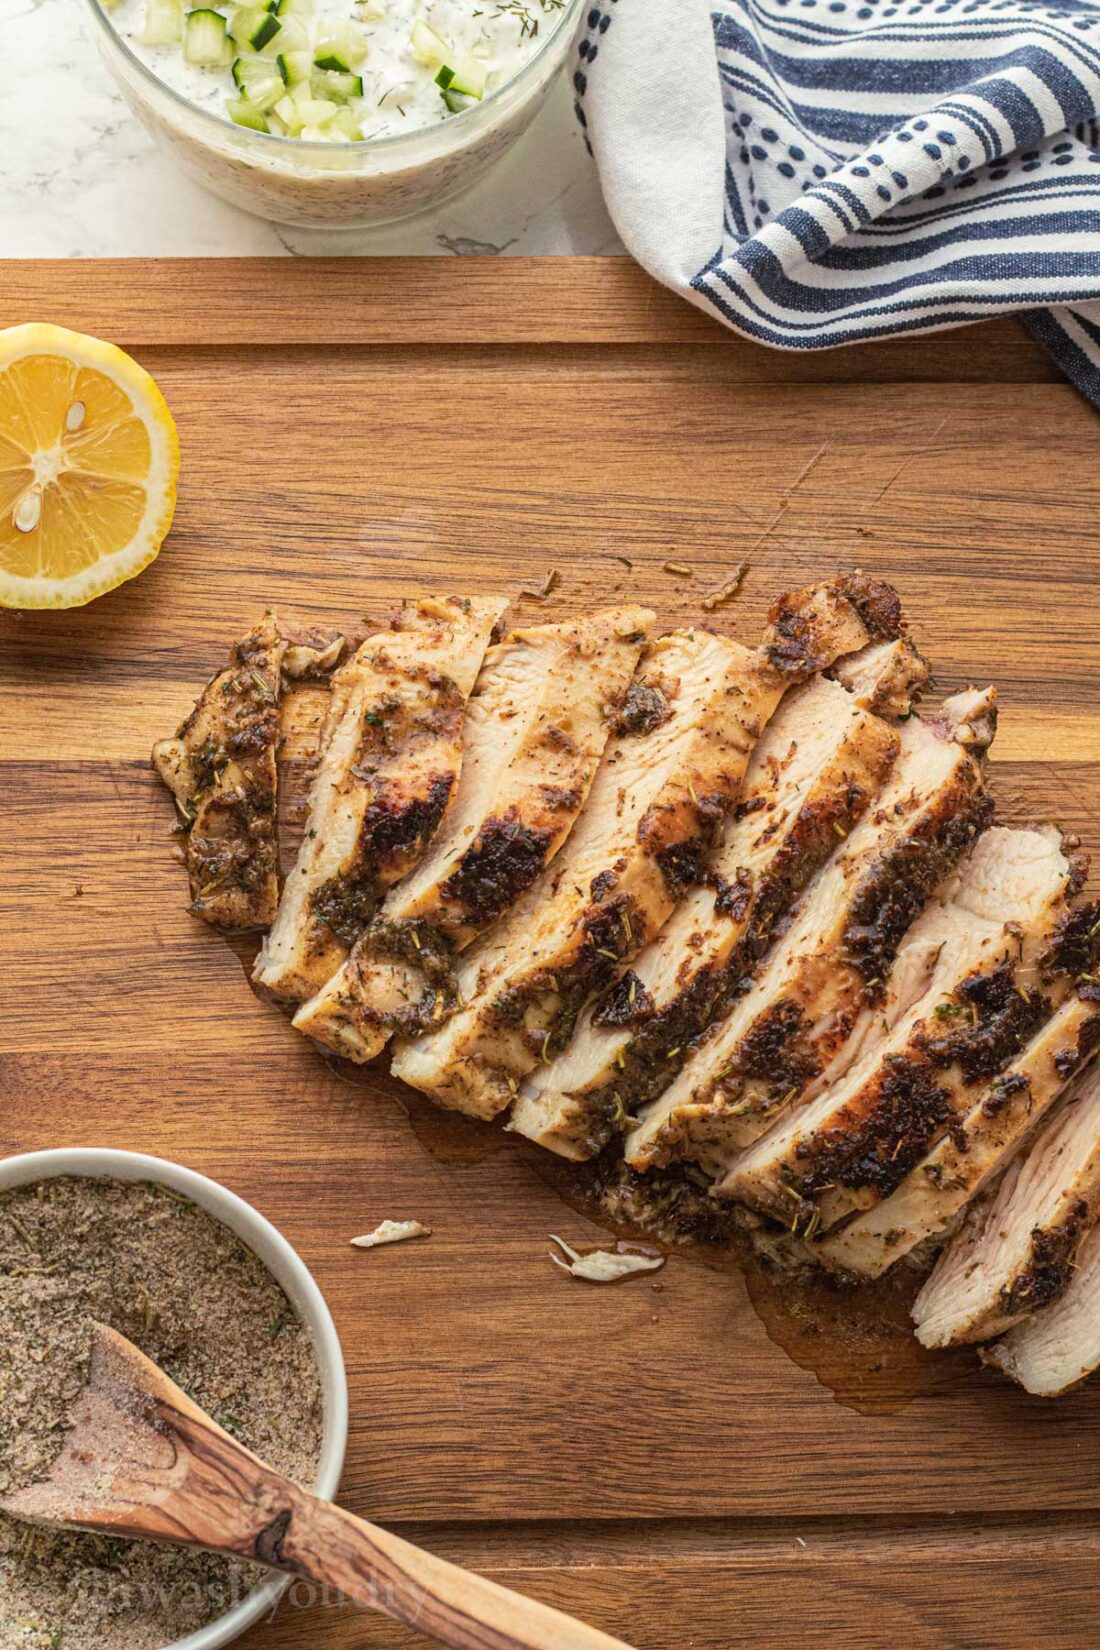 Sliced cooked chicken breast on wood board with white bowl of spice mix and lemon slice. 